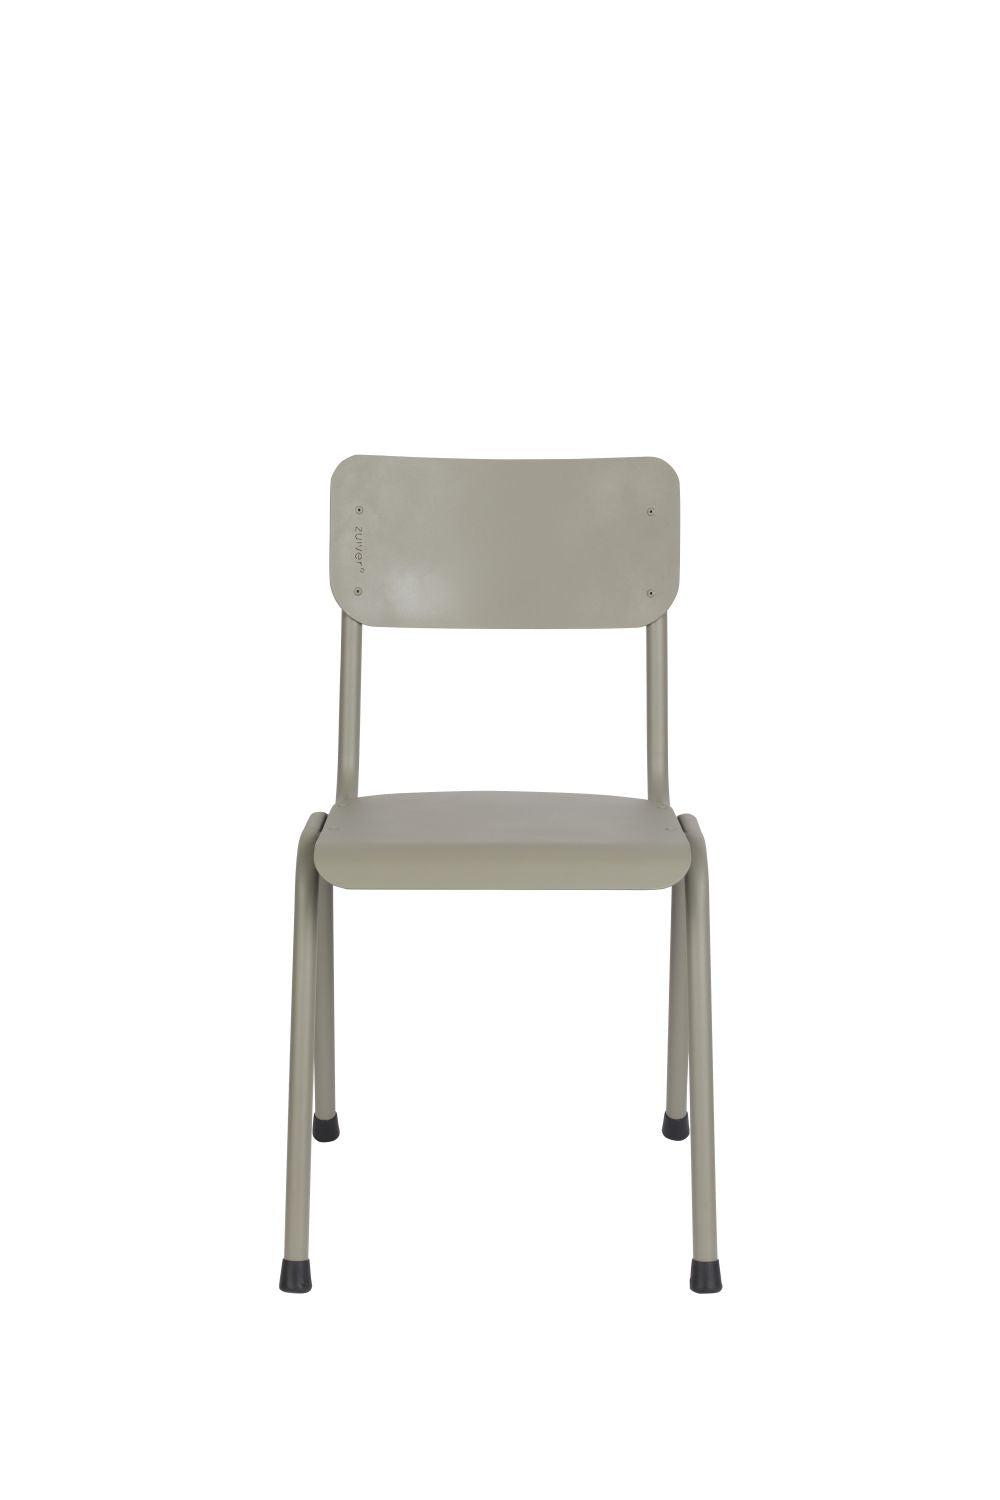 Zuiver Set of 2 Outdoor Chairs Back To School Moss Grey